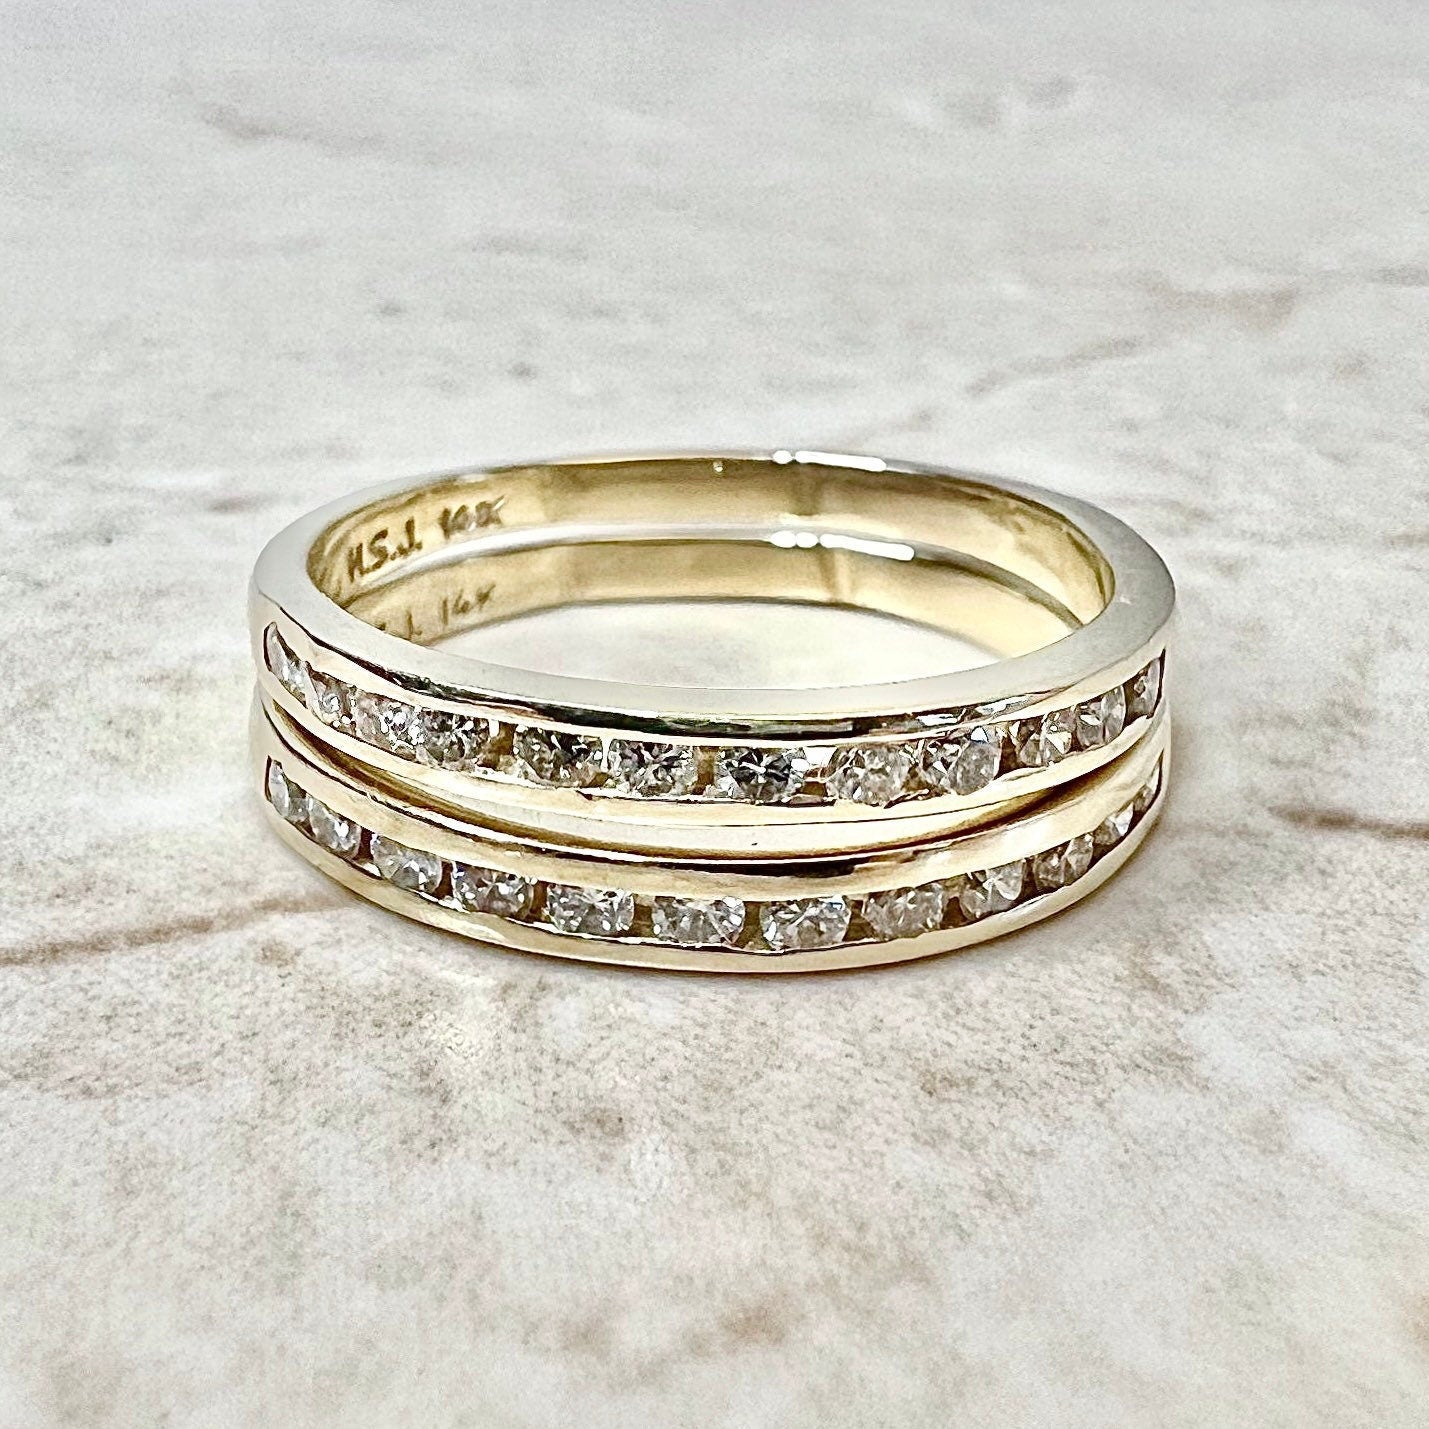 14K Half Eternity Diamond Band Ring 0.30 CT - Yellow Gold Eternity Ring - Anniversary Ring - April Birthstone - Best Gift For Her